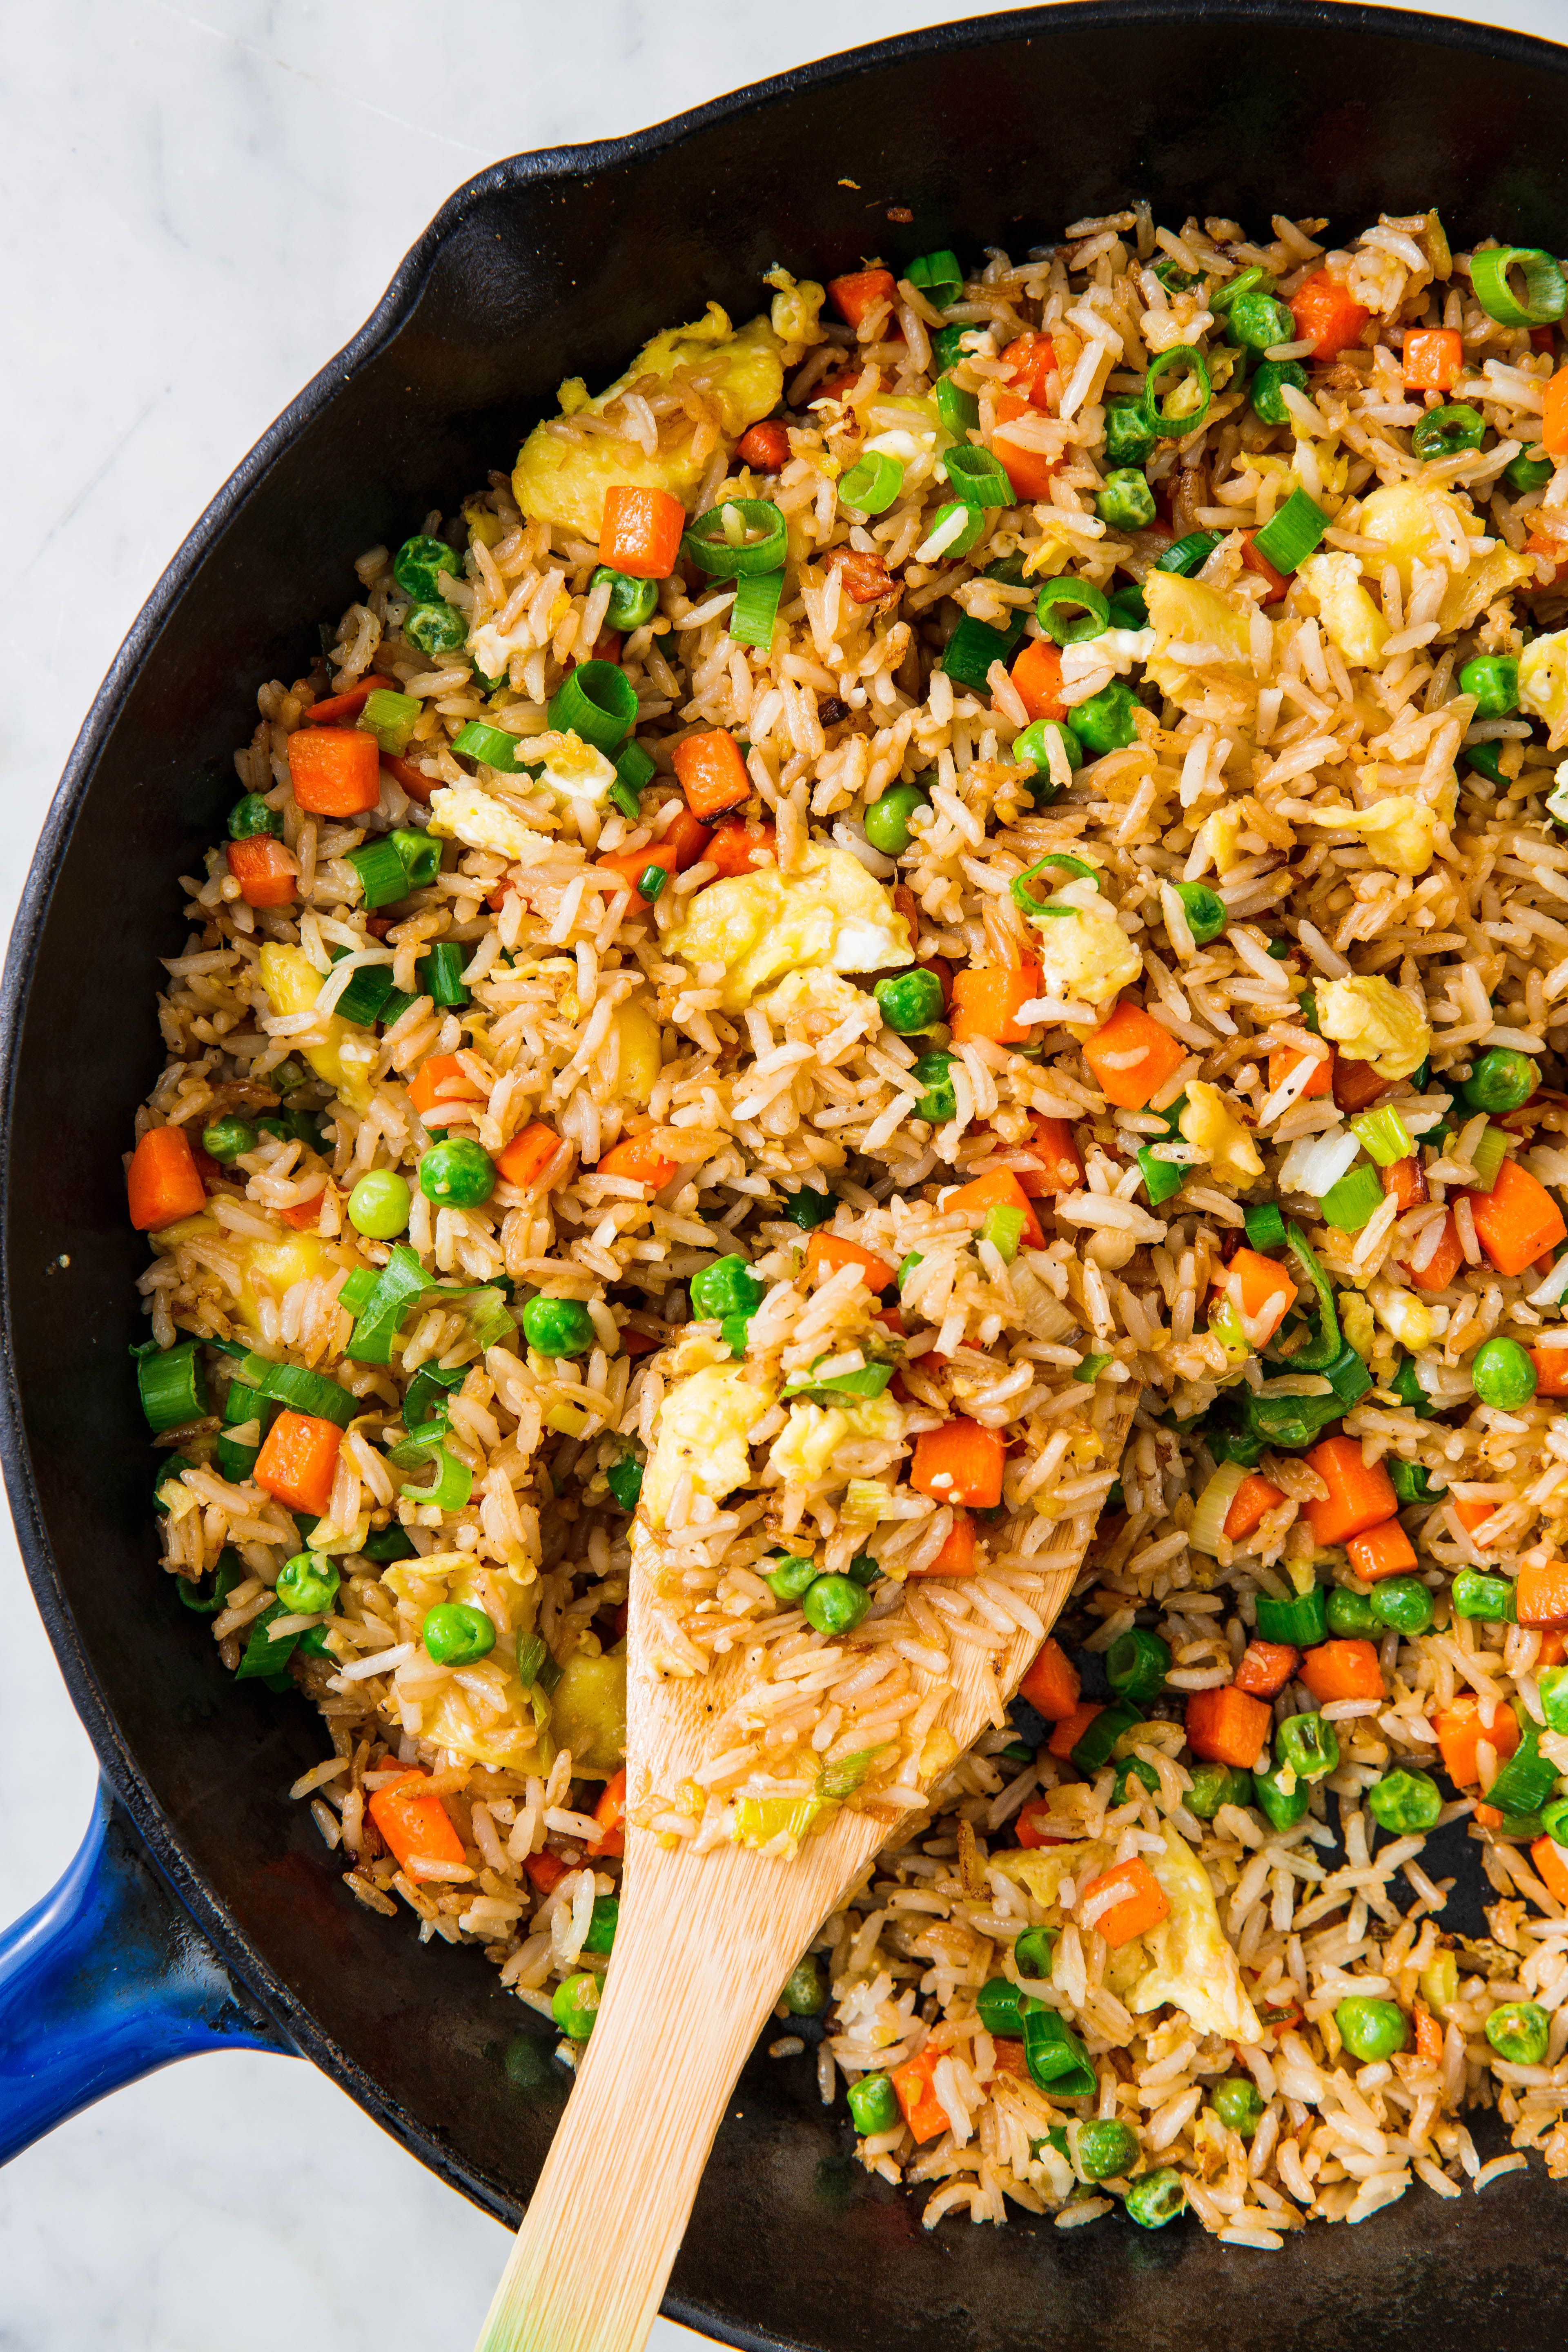 Best Fried Rice Recipe - How To Make Perfect Fried Rice